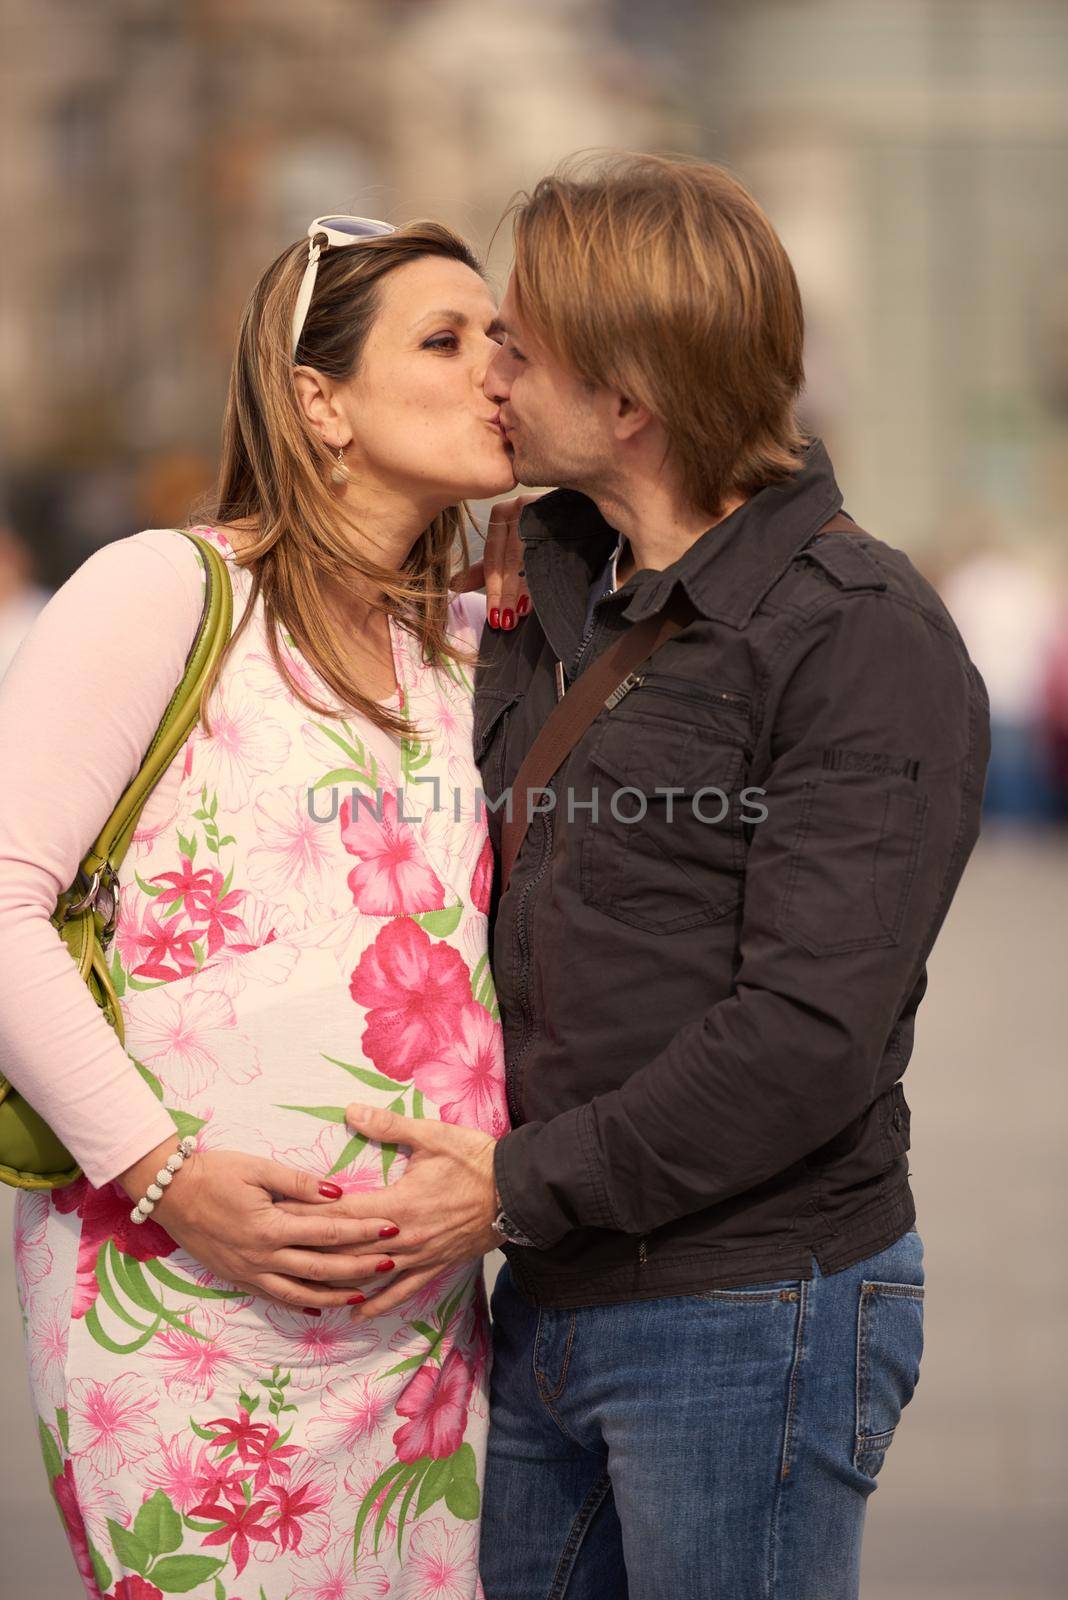 Happy and young pregnant couple have fun and relax outdoor